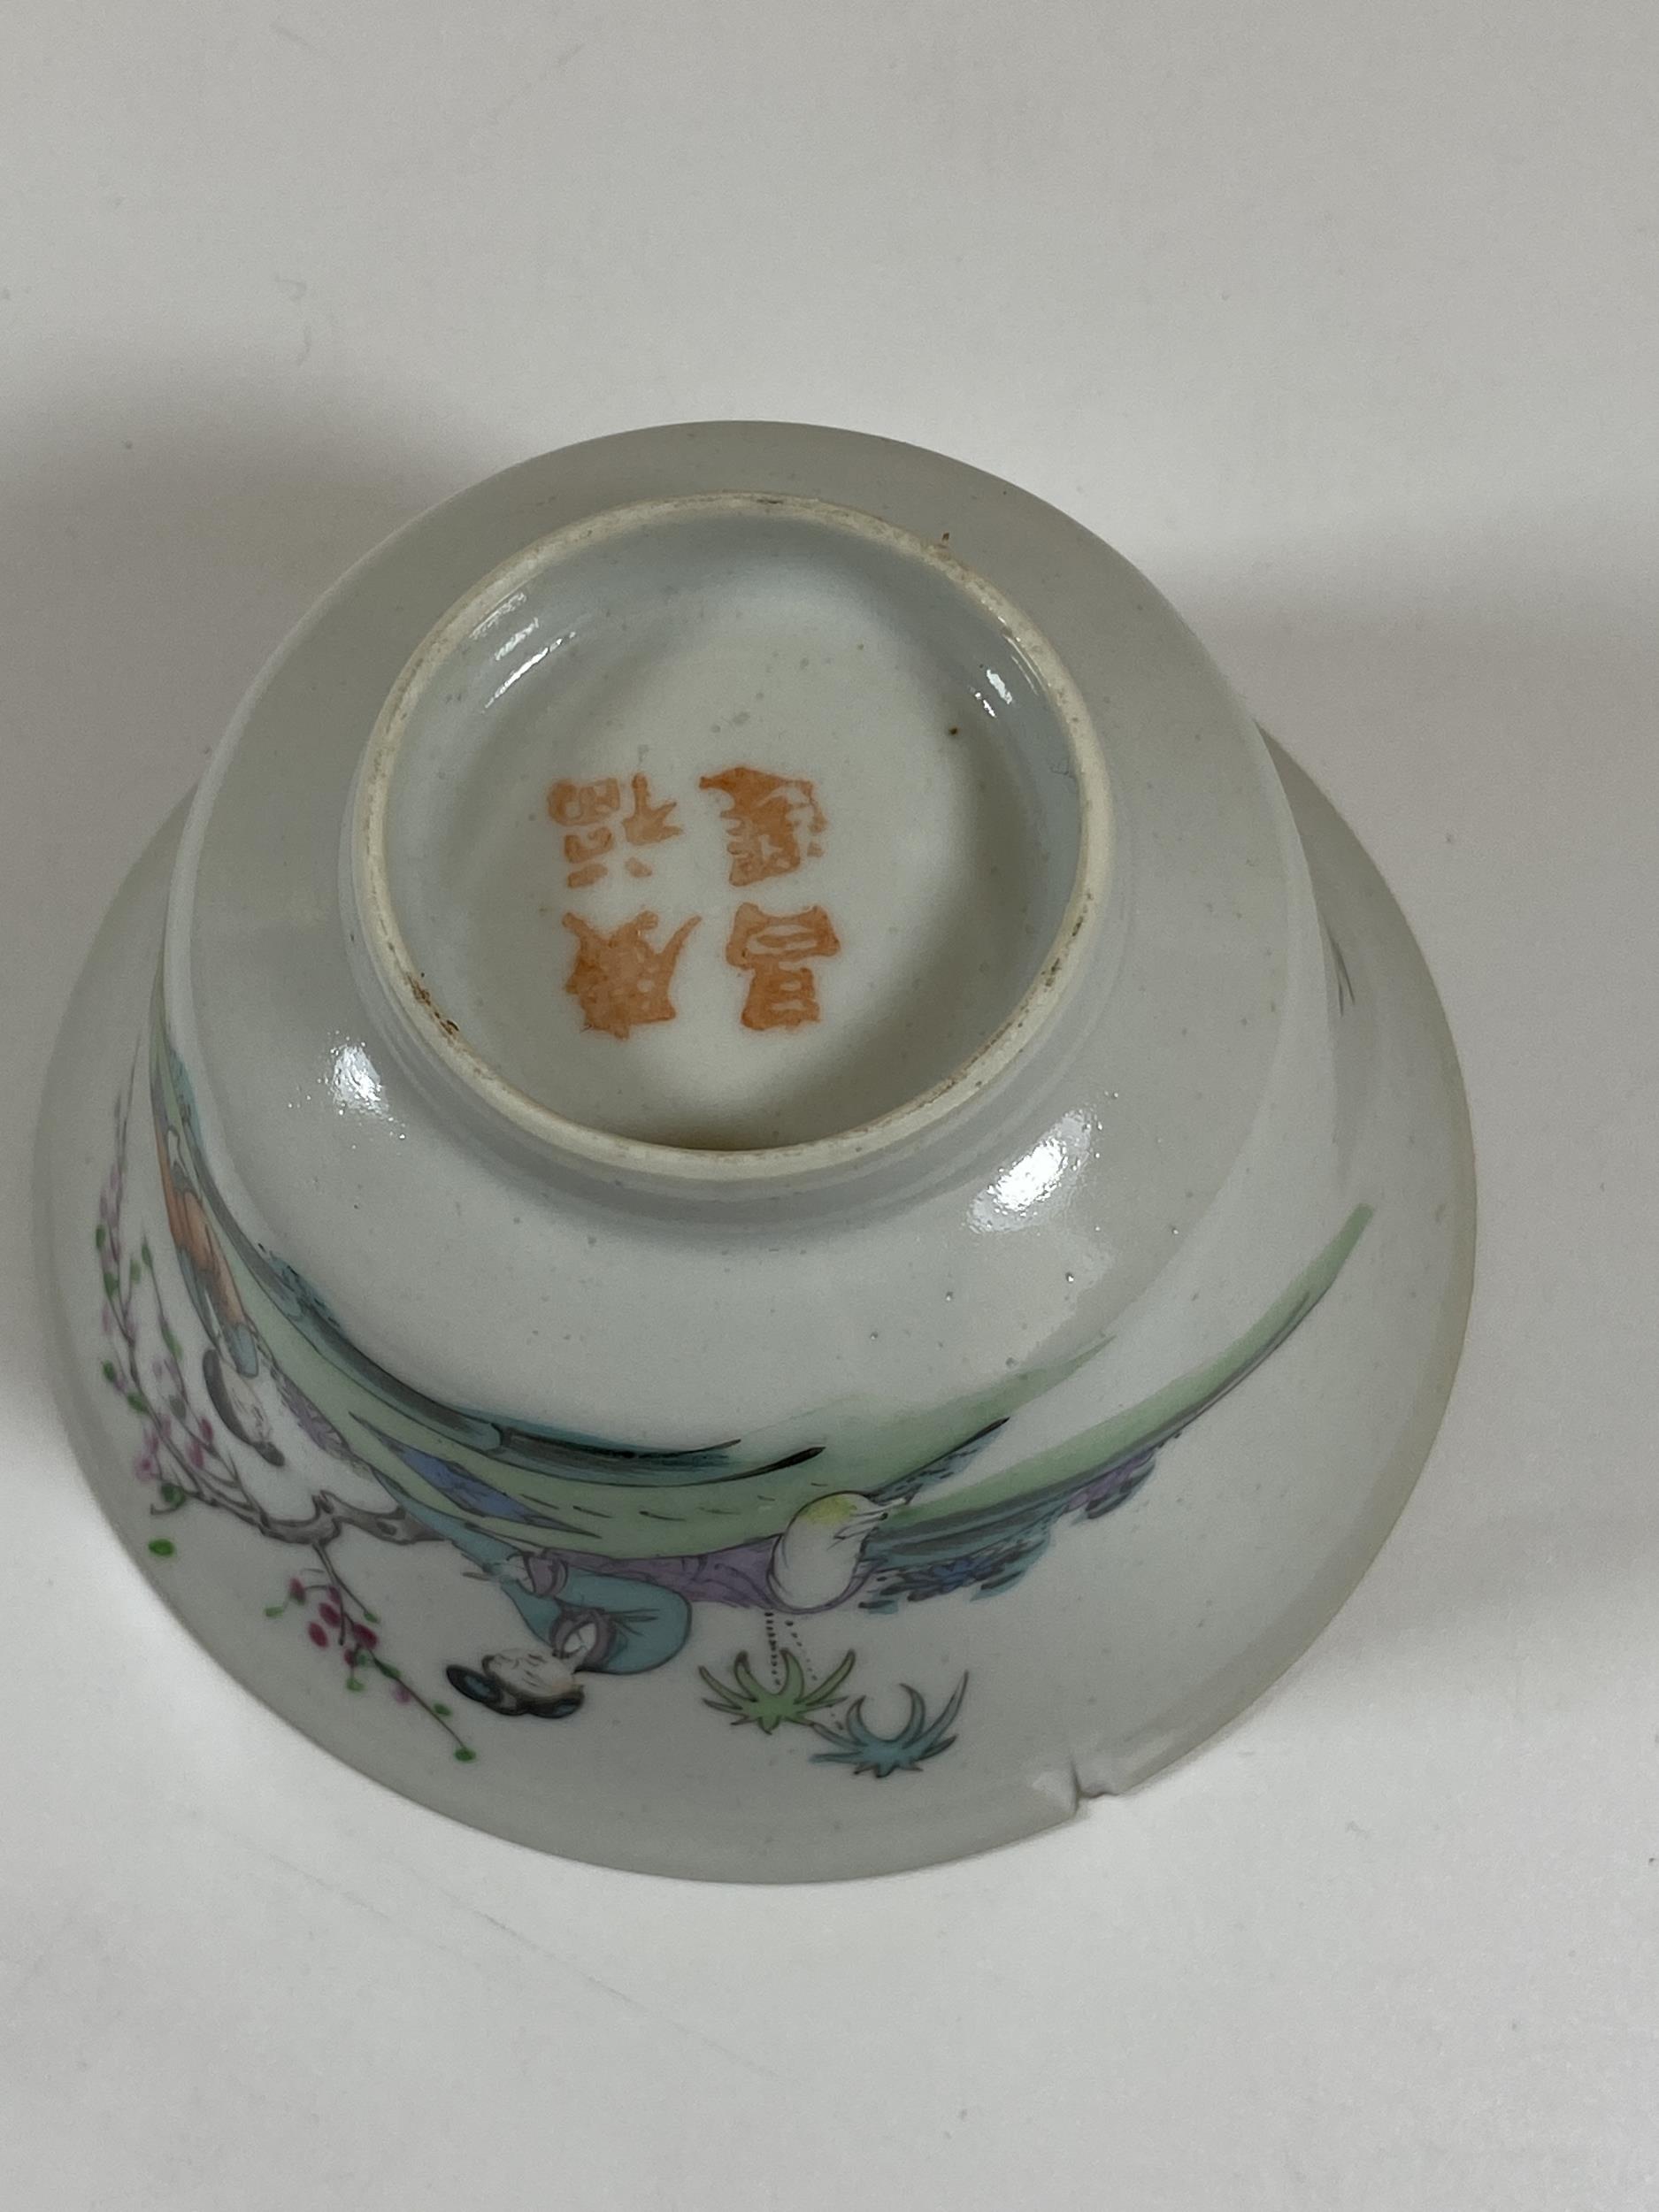 AN EARLY 20TH CENTURY CHINESE PORCELAIN BOWL WITH FIGURAL DESIGN, FOUR CHARACTER MARK TO BASE, - Image 5 of 6